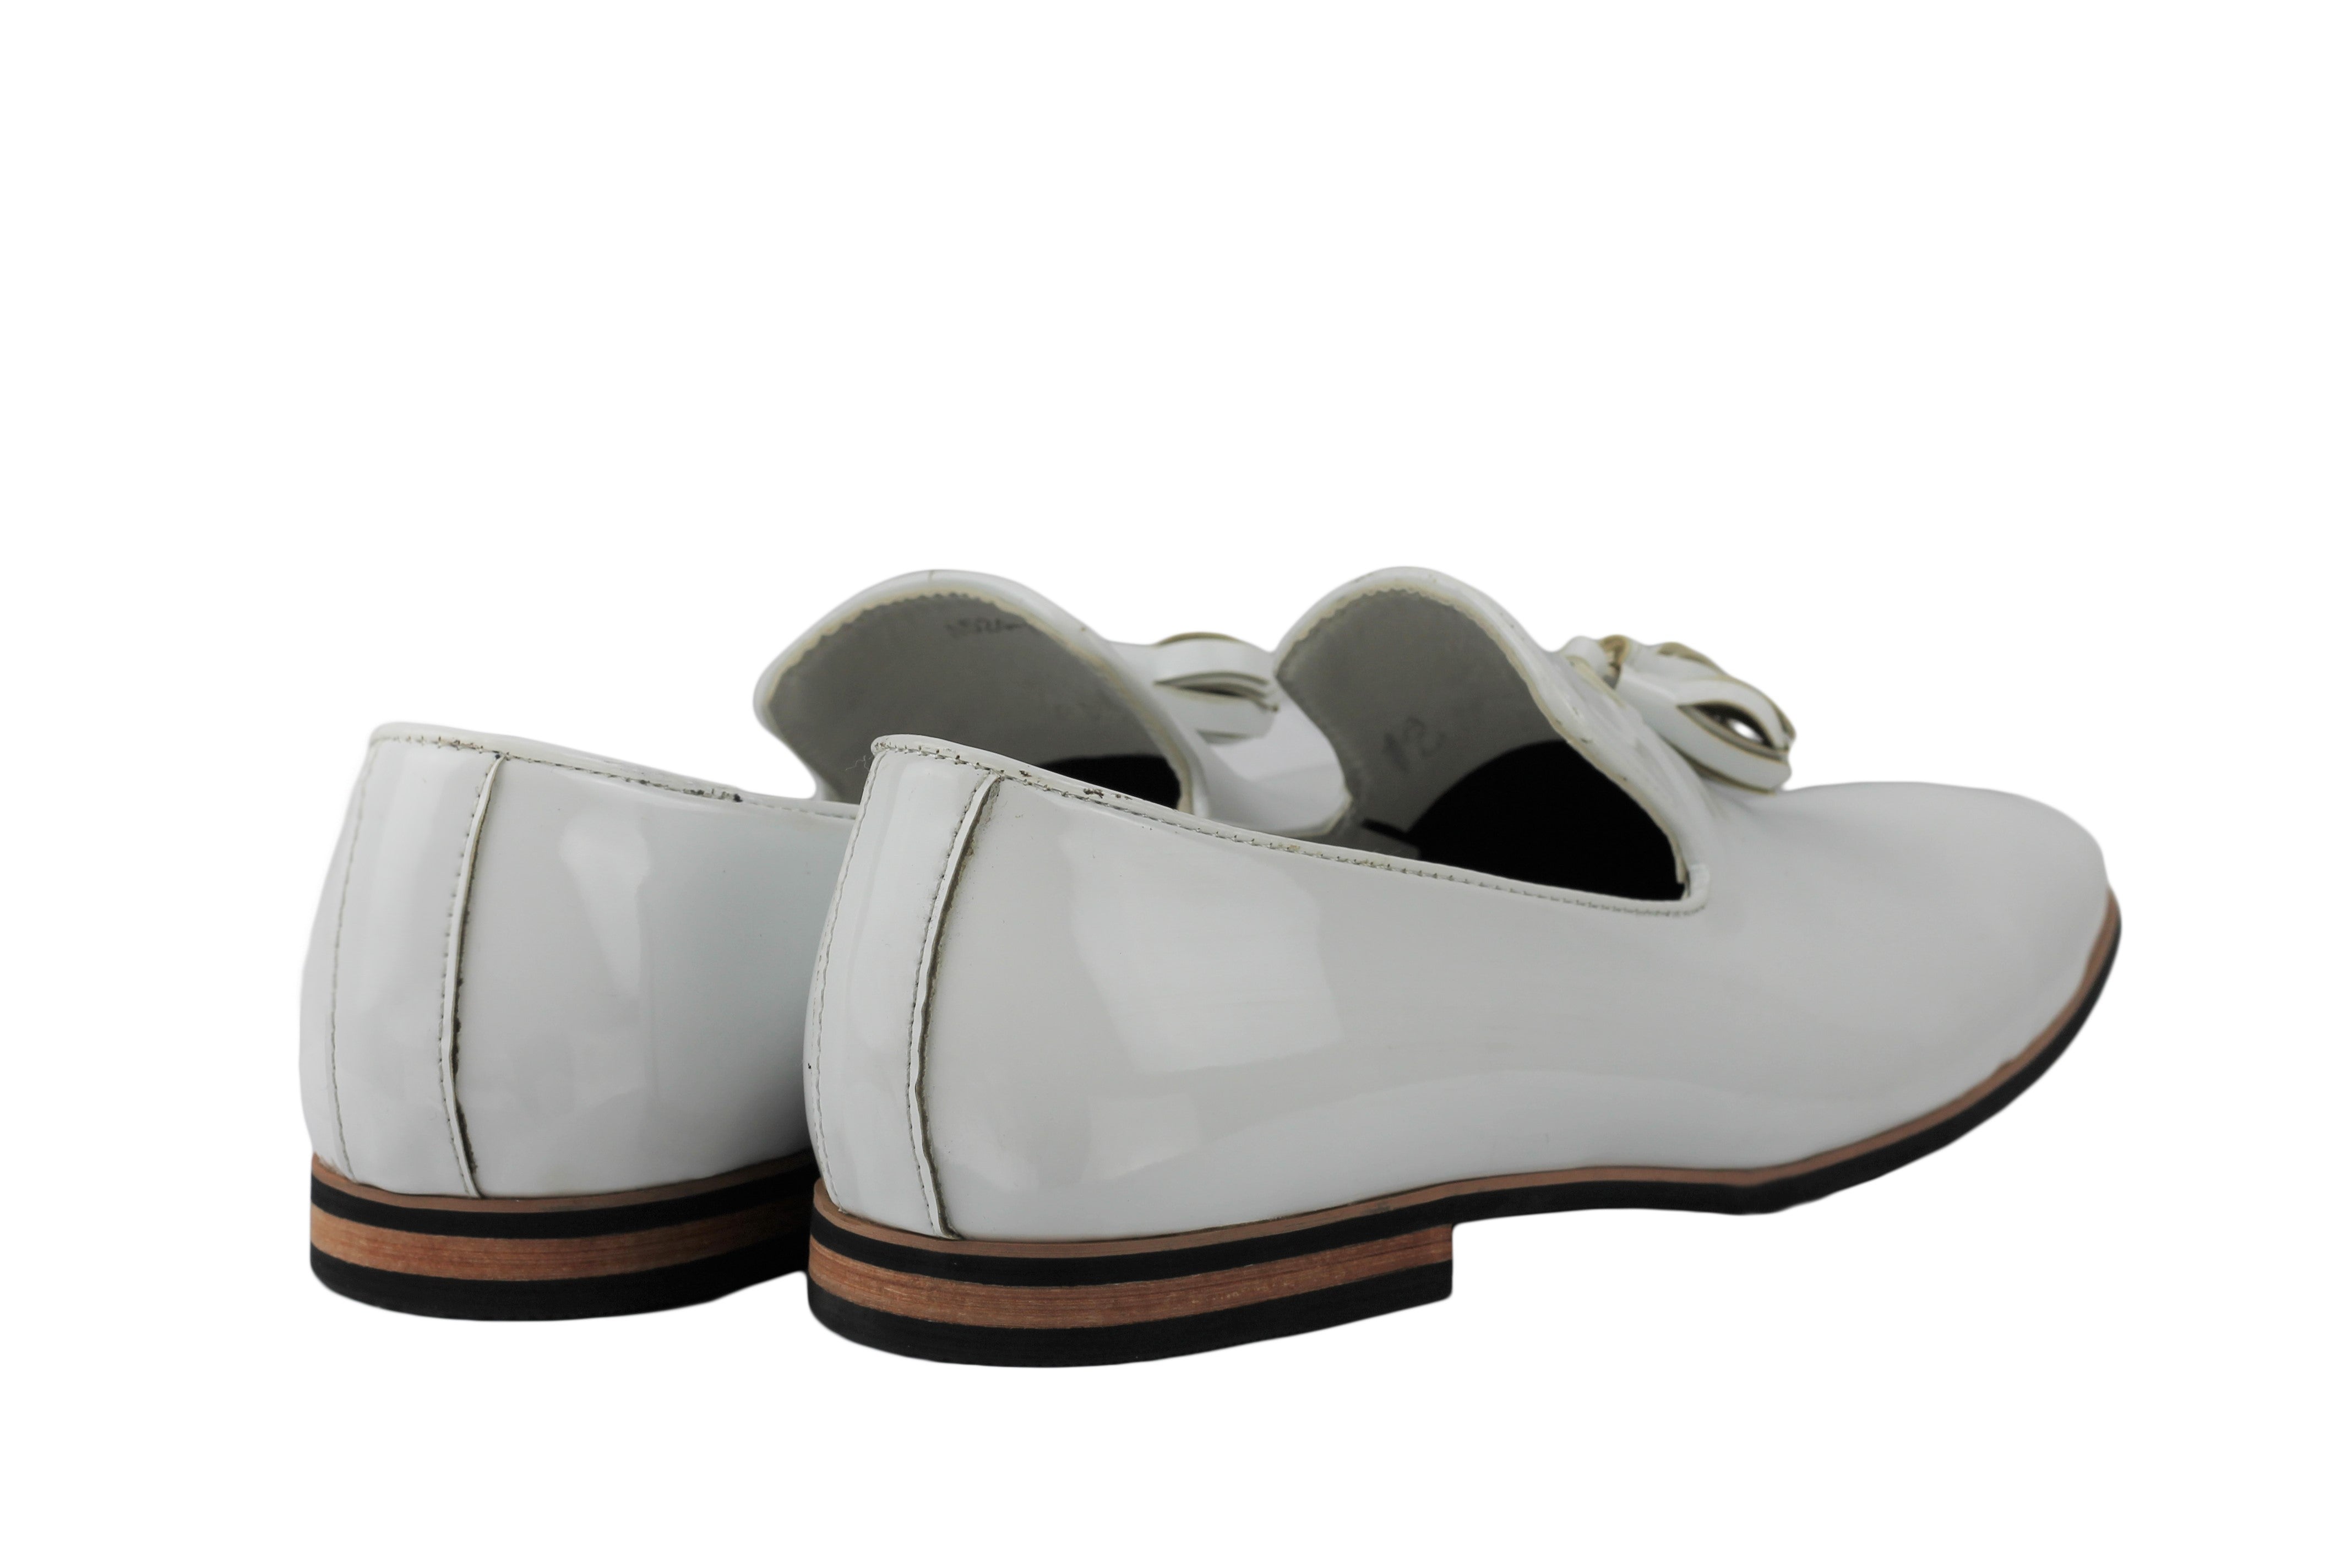 Shiny Patent Leather Slip On Shoes